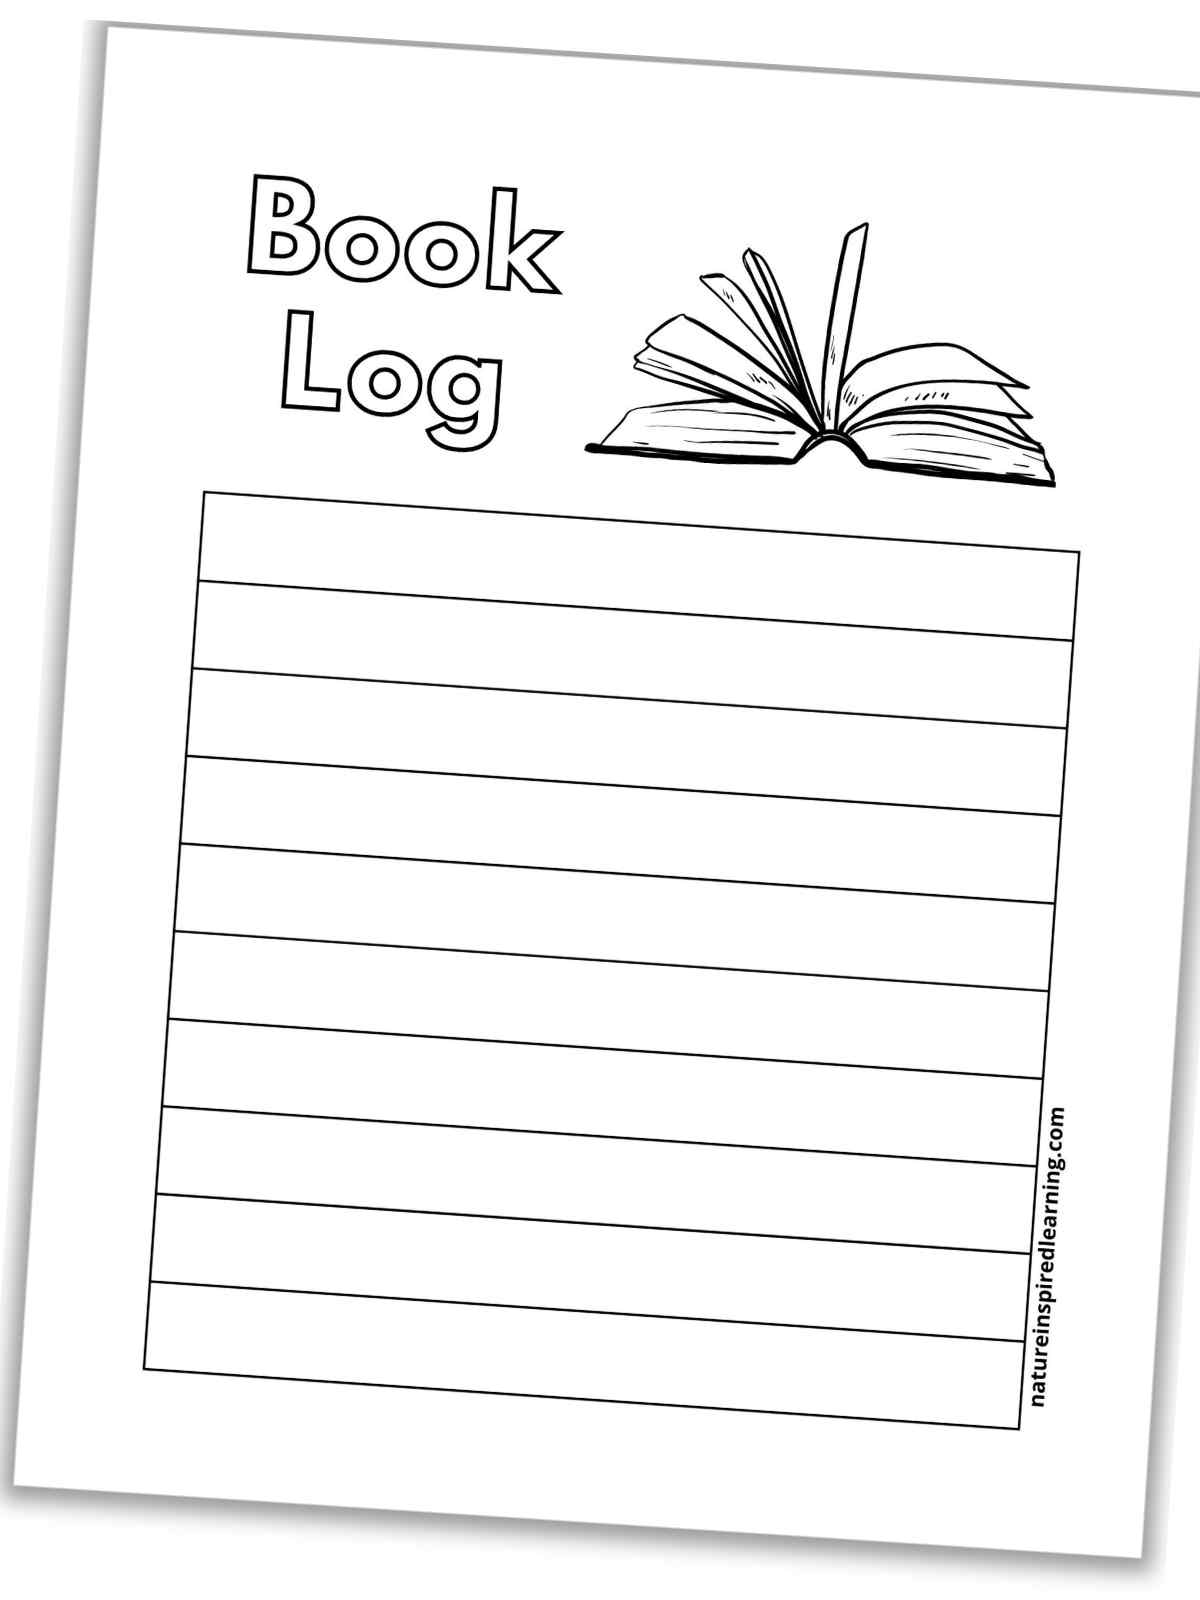 book log printable with an open book clipart above a table with ten rows